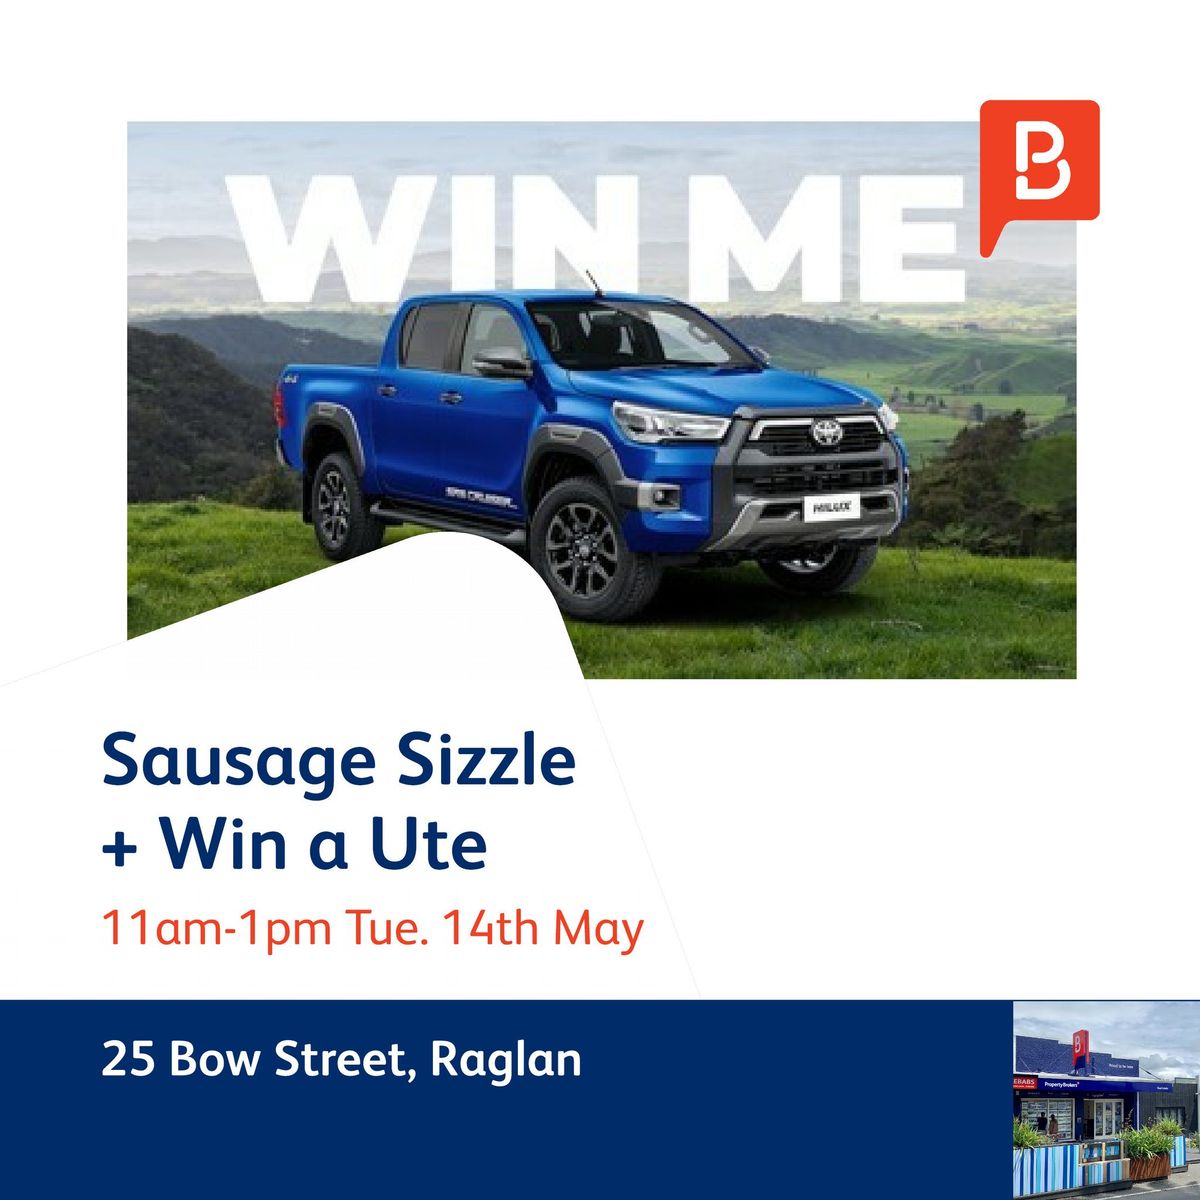 FREE Sausage Sizzle and Toyota Hilux Giveaway!